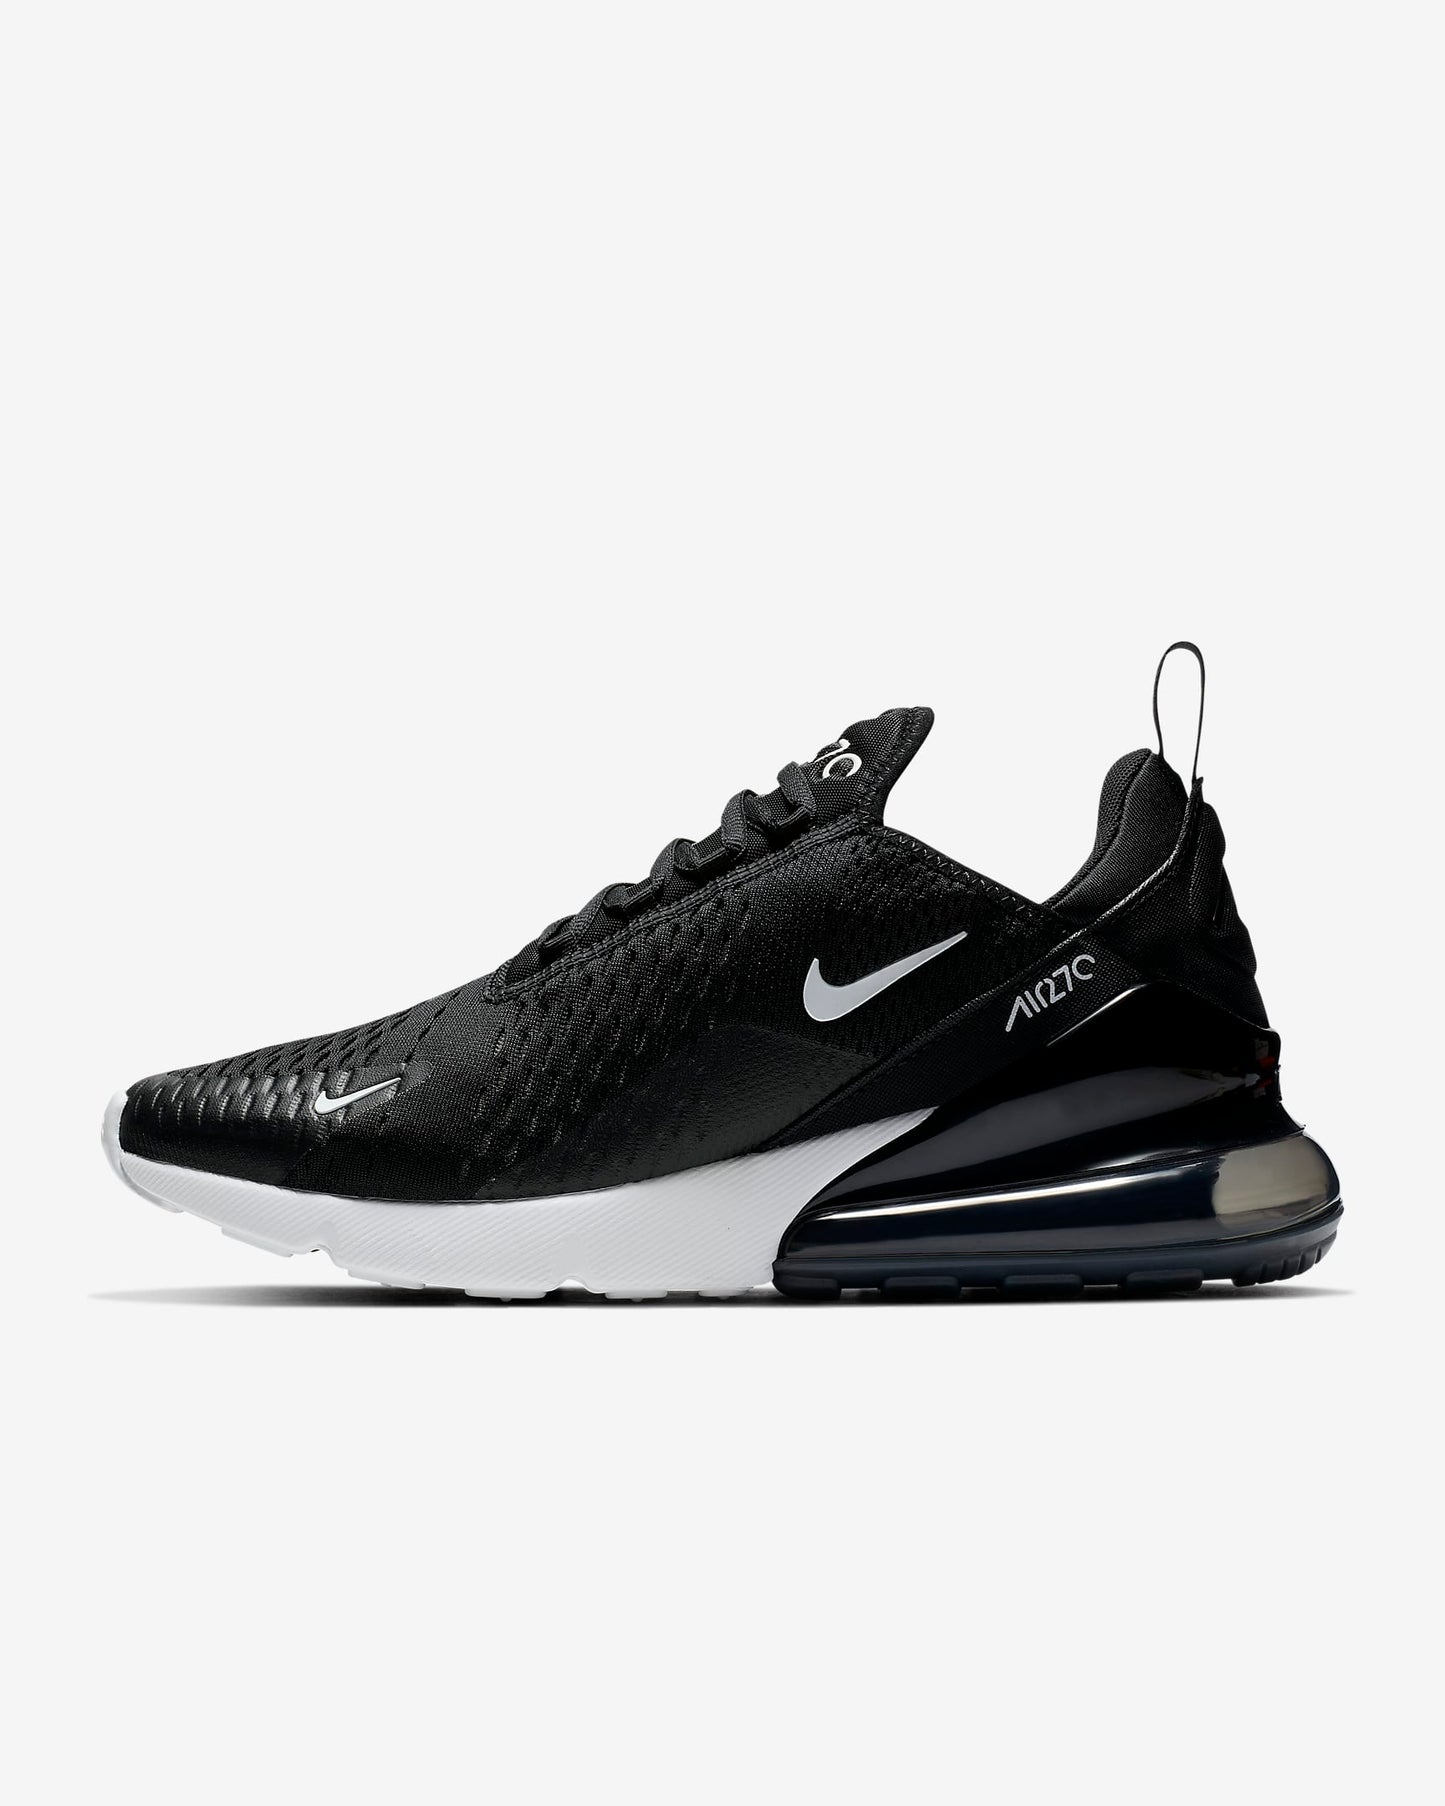 Nike Air Max 270 Women's Shoes, Black/White/Anthracite